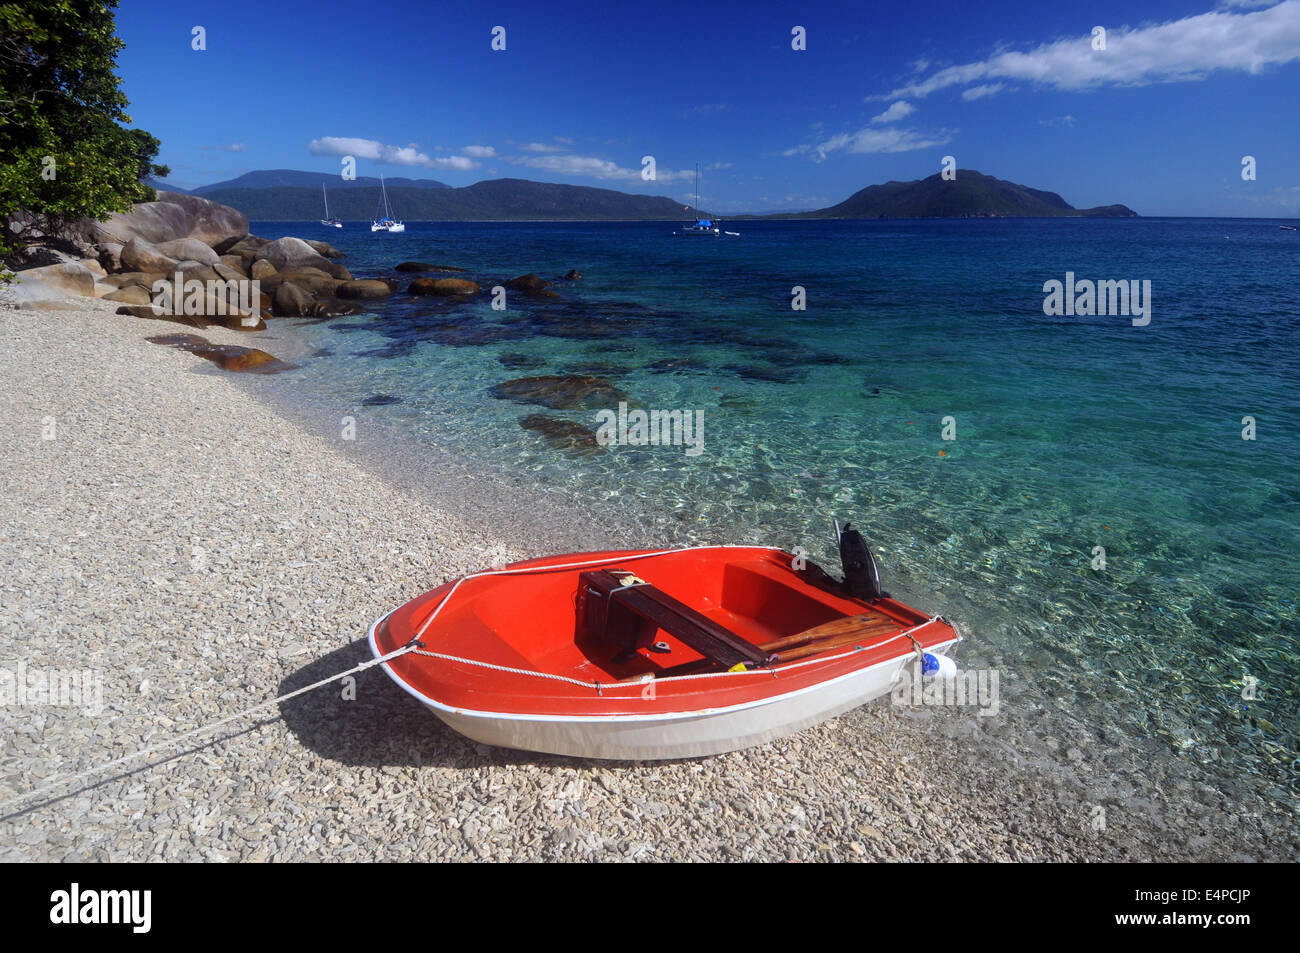 Red dinghy on coral rubble beach, Fitzroy Island, Great Barrier Reef Marine Park, Queensland, Australia. No PR Stock Photo